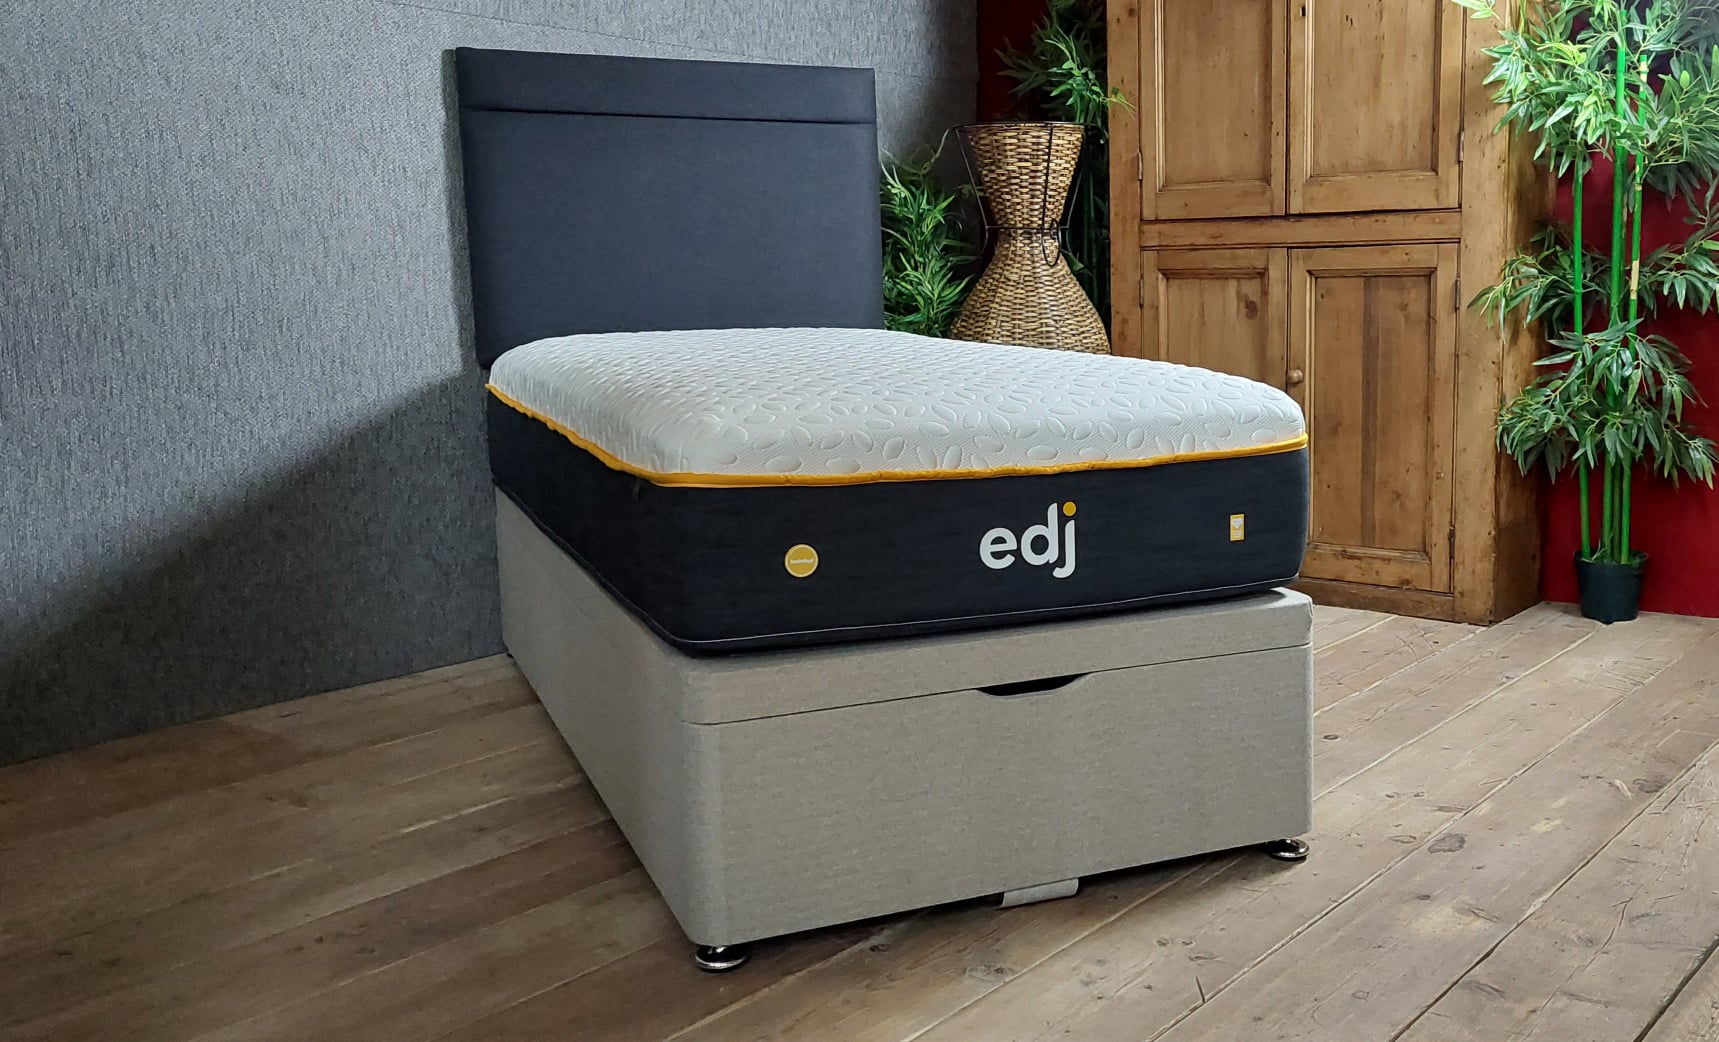 Snoozestation: A Leeds Mattress and Bed Retailer with a Difference